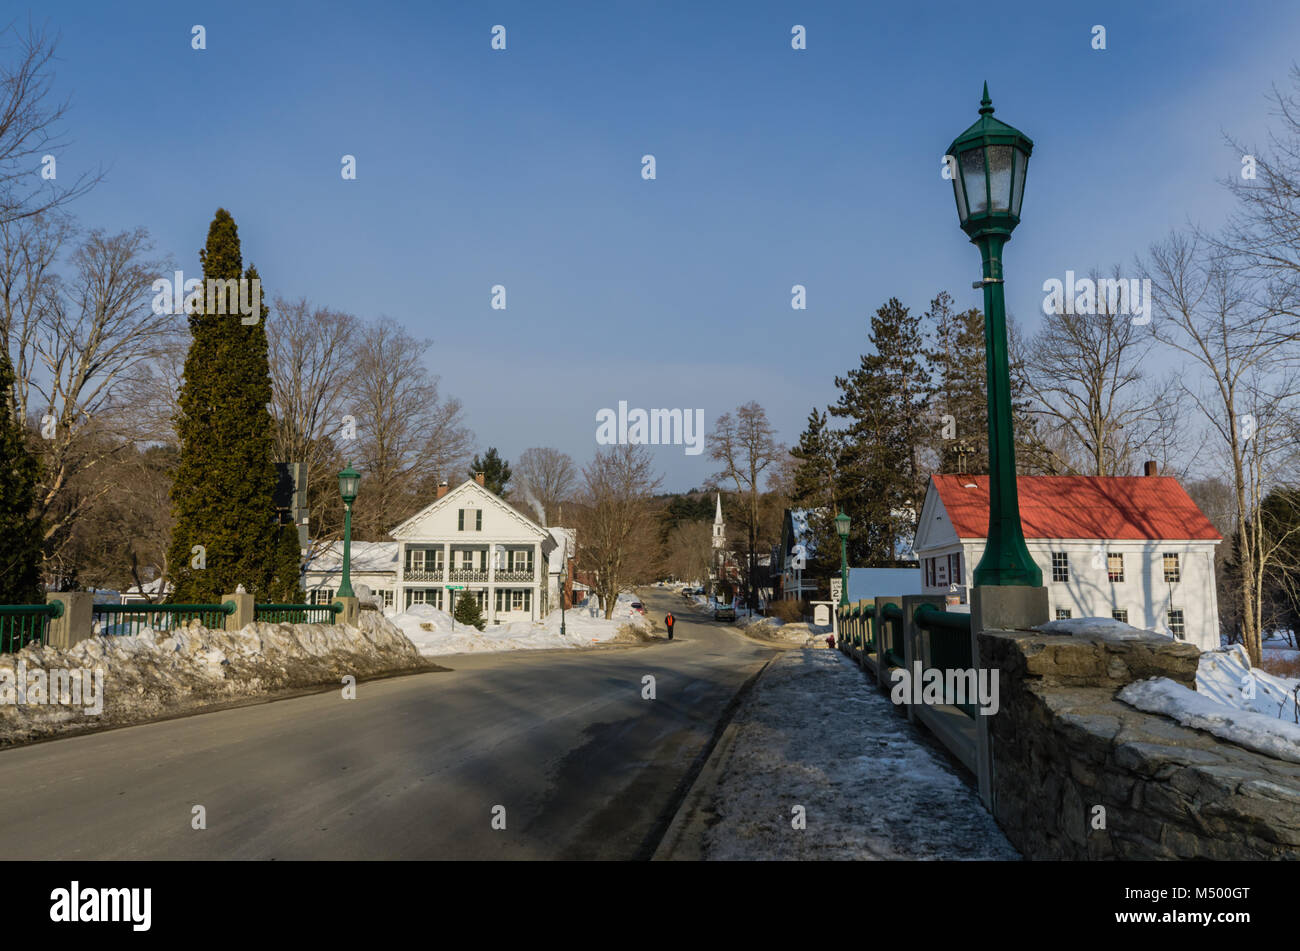 Set in rural Vermont, the town was founded as Thomlinson, but renaming rights were auctioned in 1791. The high bidder, who reportedly offered 'five do Stock Photo